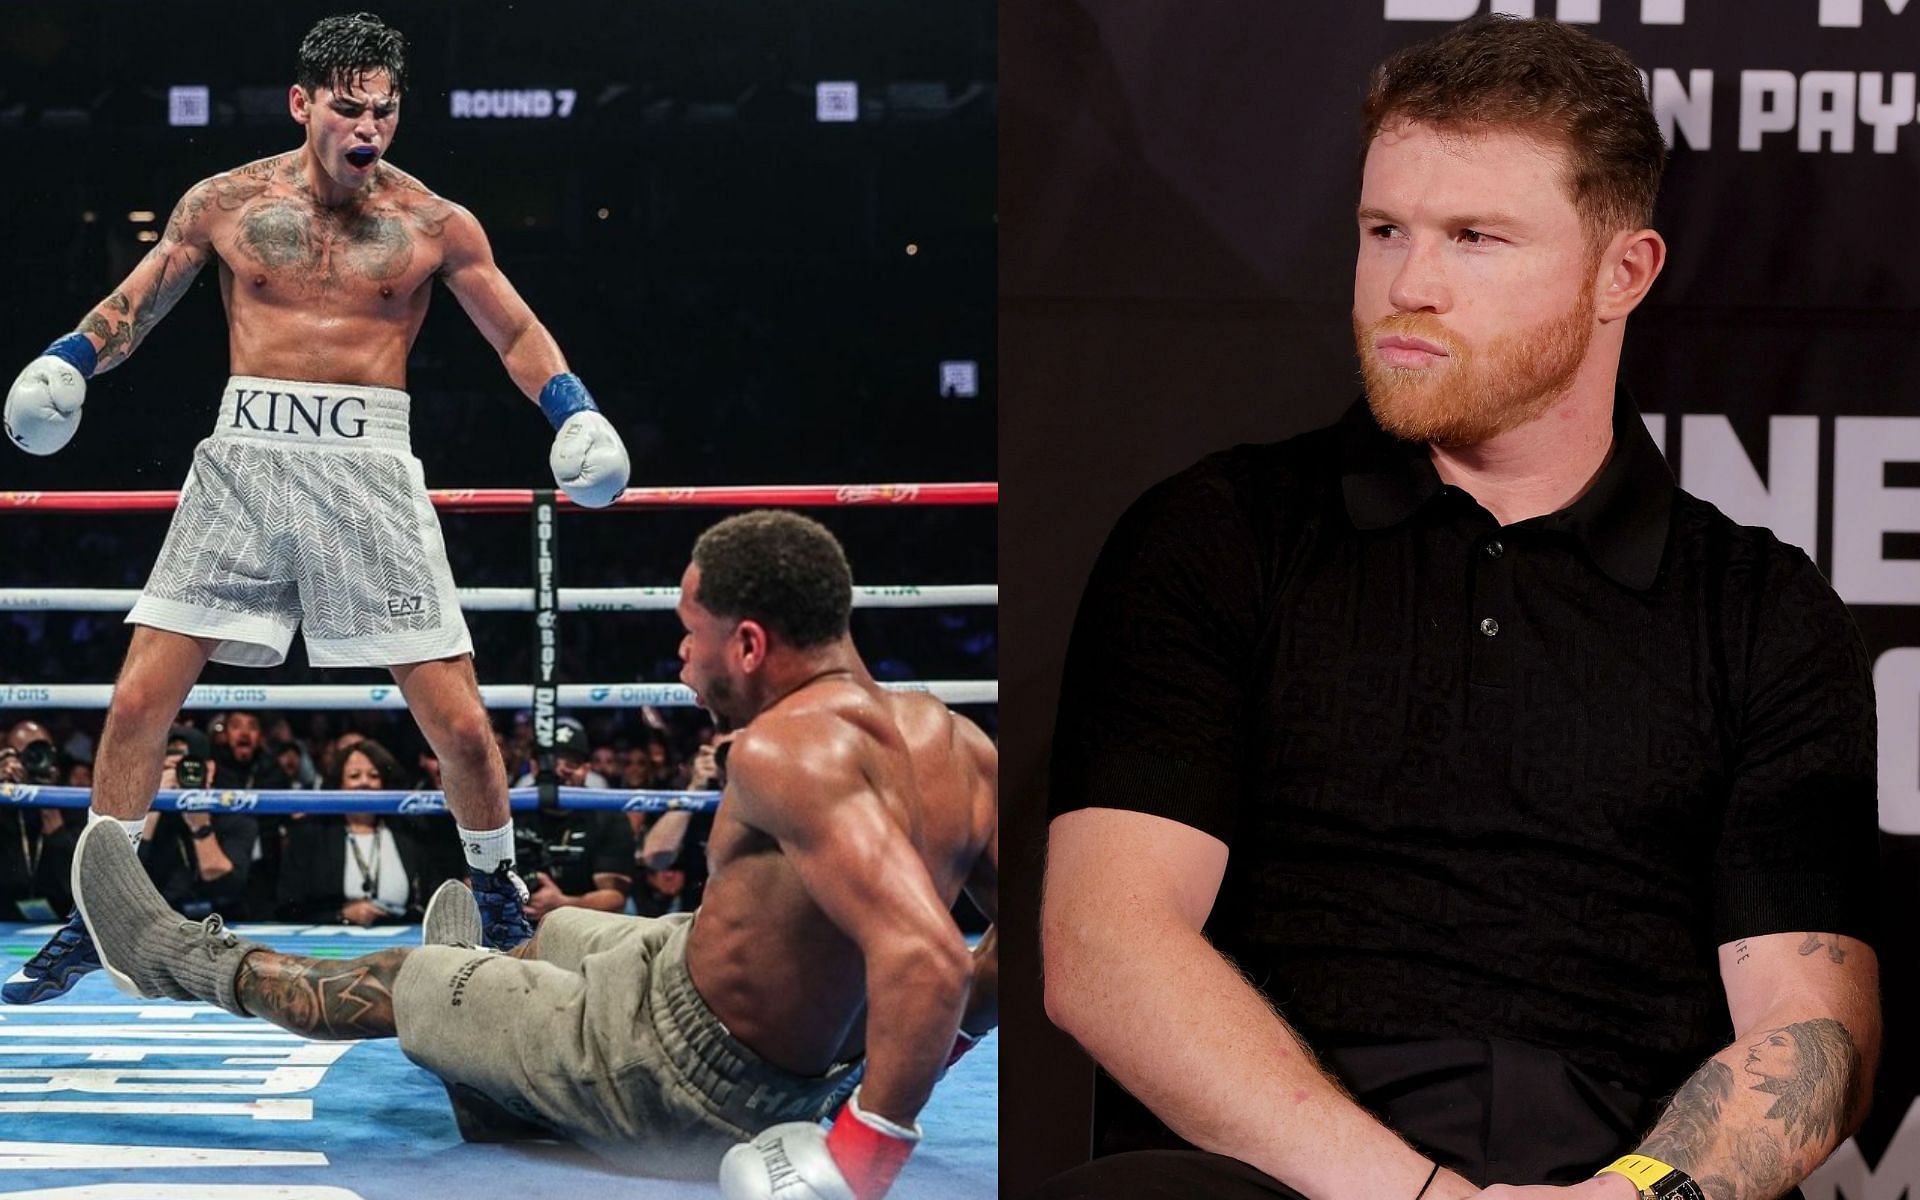 Canelo Alvarez (right) shares his thoughts on Ryan Garcia beating Devin Haney (left) [Images Courtesy: @GettyImages]